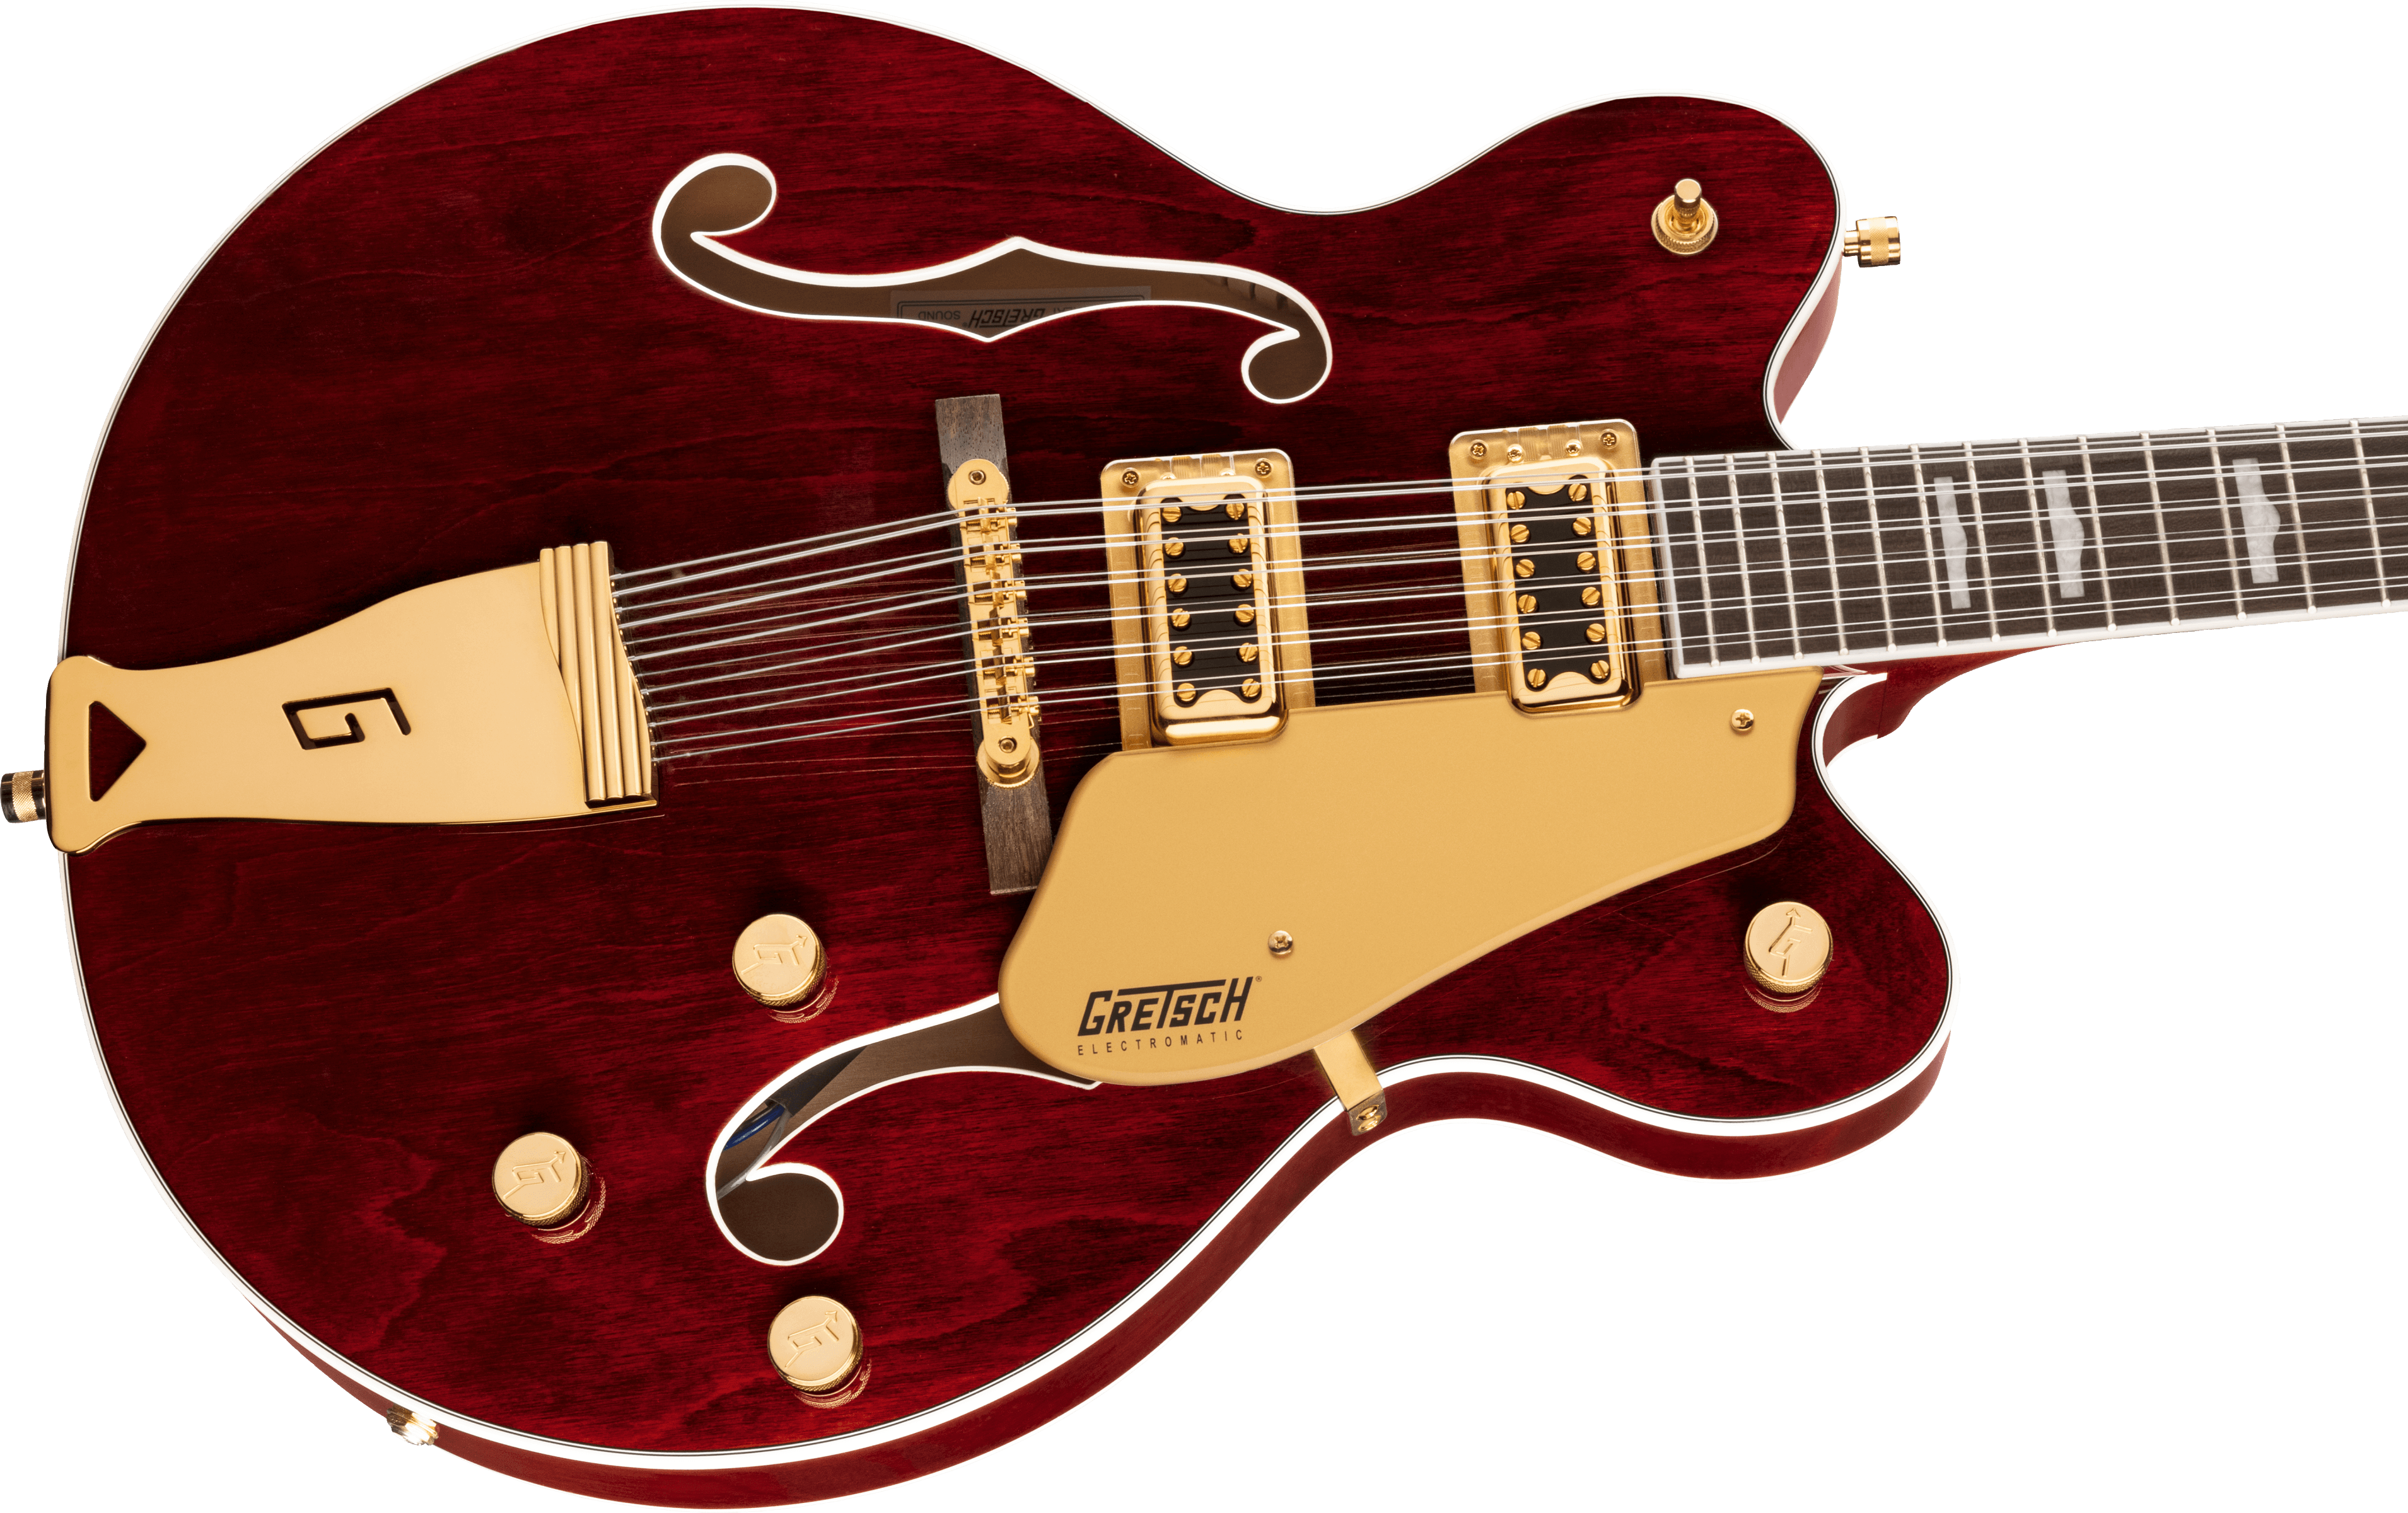 GRETSCH G5422G-12 Electromatic Classic Hollow Body Double-Cut 12 String with Gold Hardware Walnut Stain 2516319517 SERIAL NUMBER CYGC21101728 - 7.0 LBS